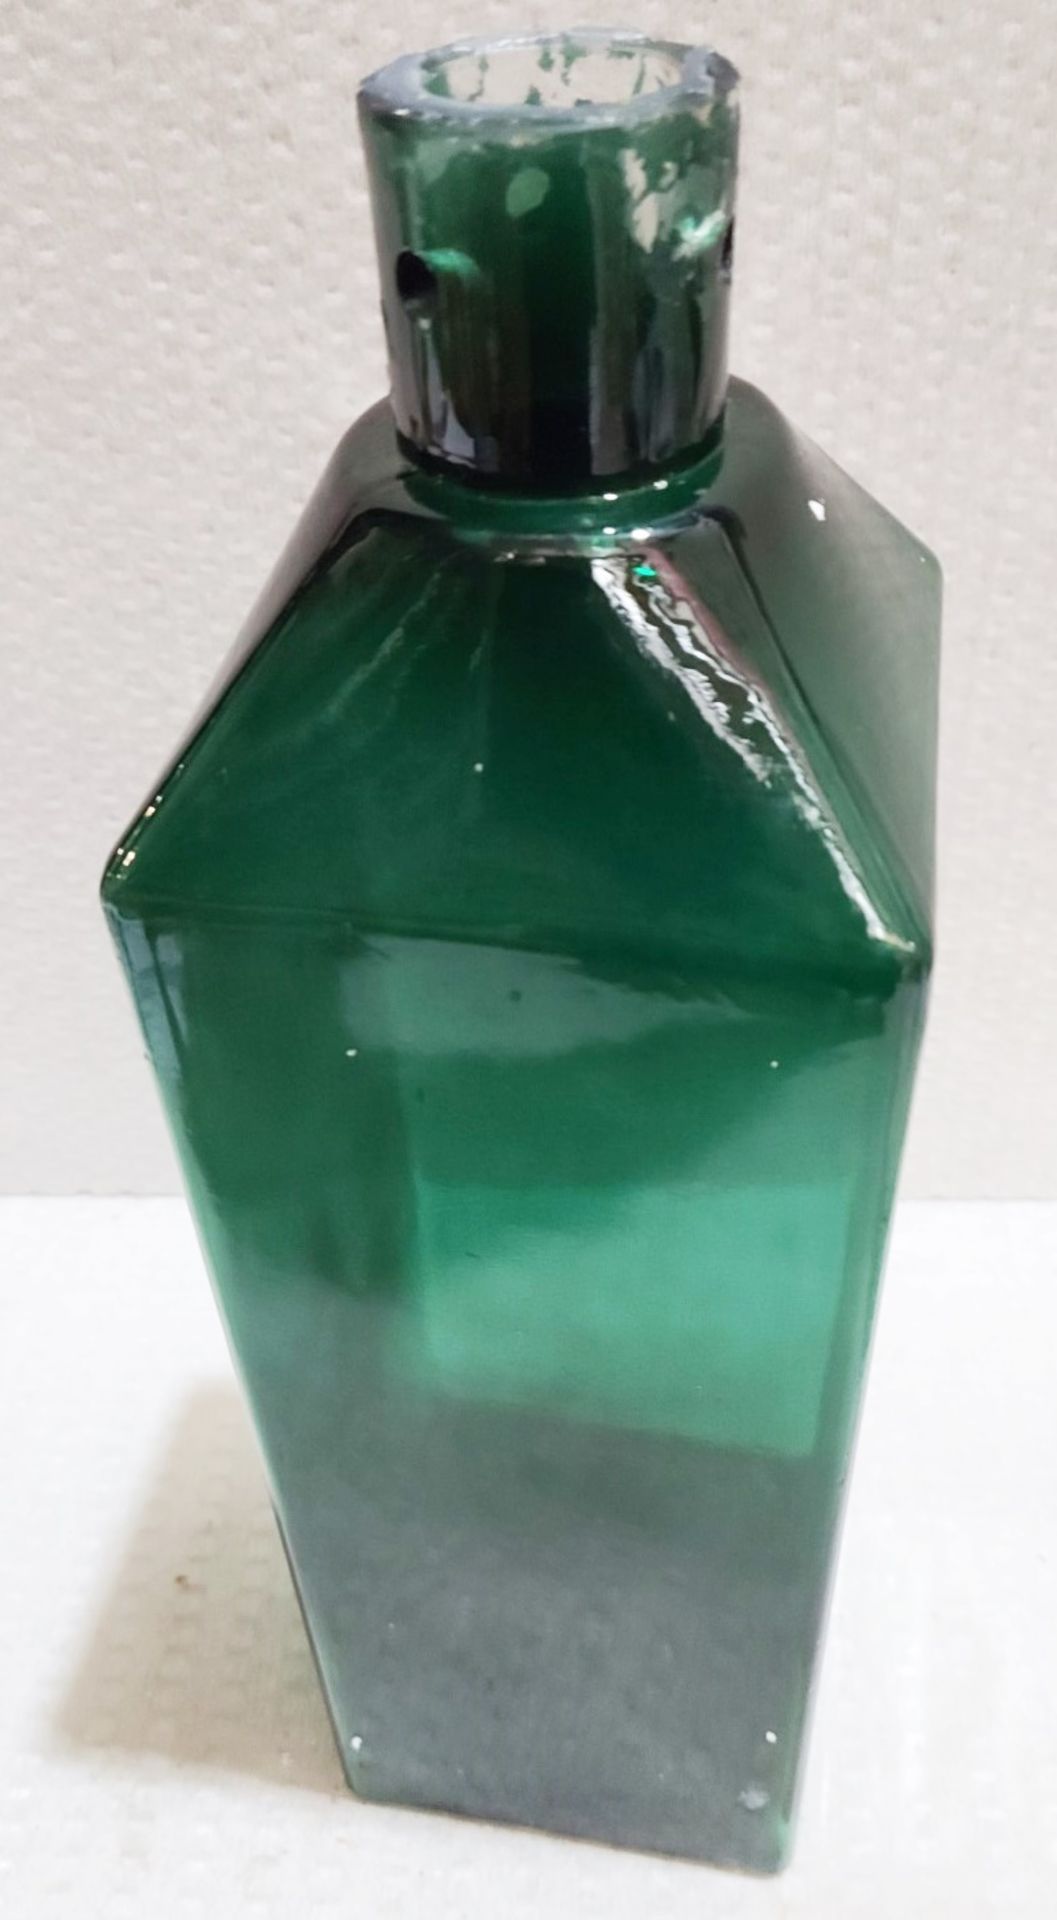 1 x CHELSOM Emerald Green Vintage Style Lamp Base - Image 6 of 6